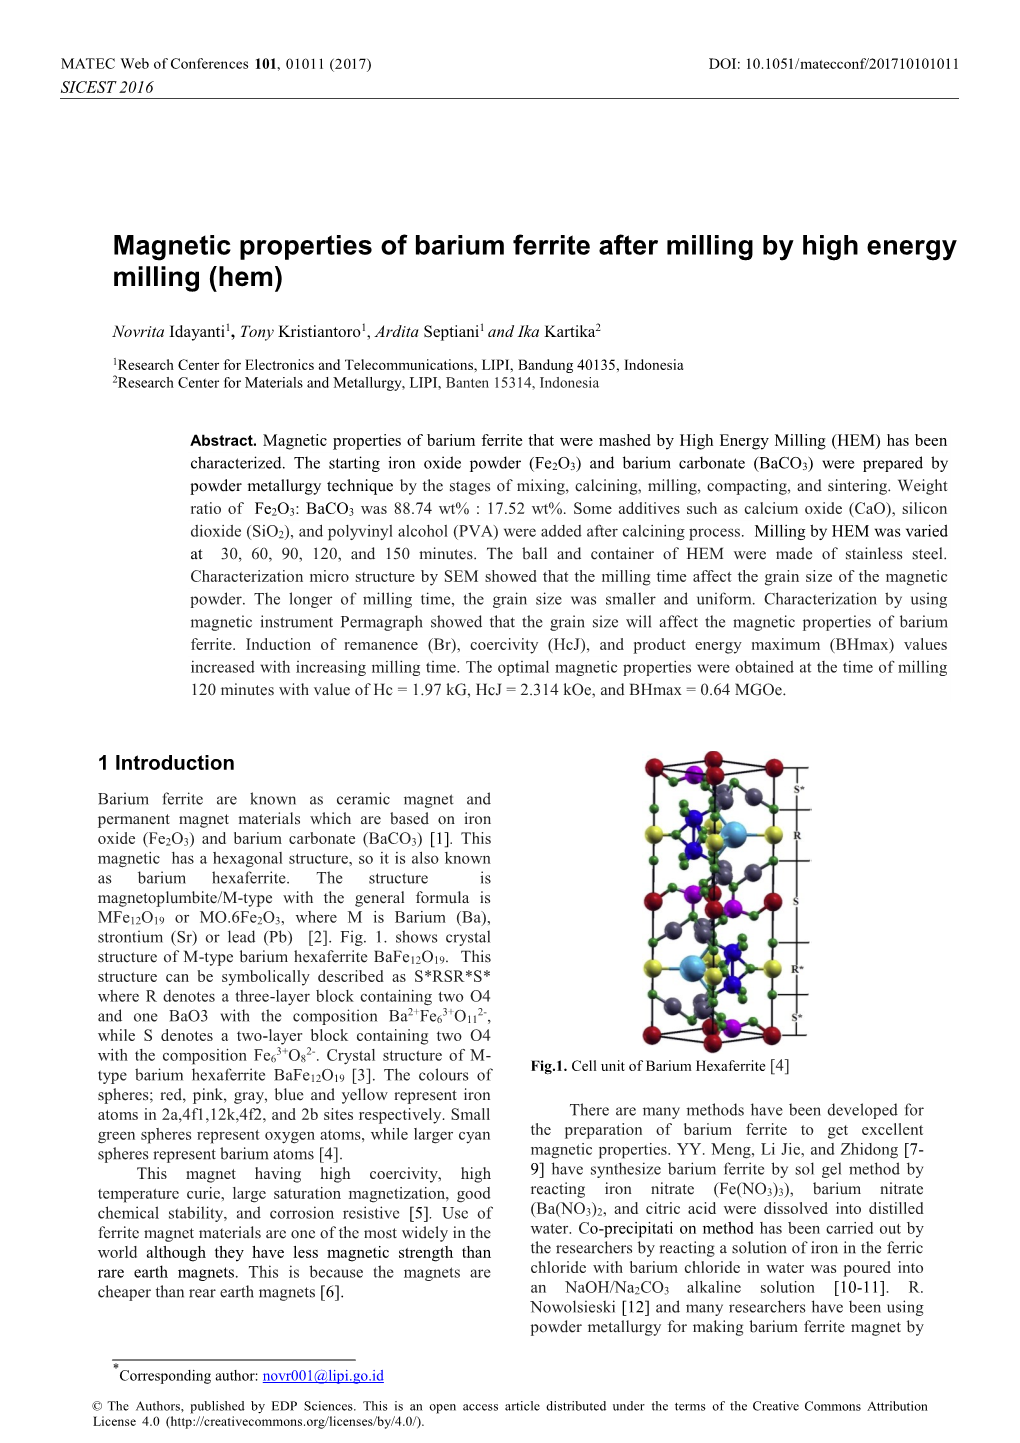 Magnetic Properties of Barium Ferrite After Milling by High Energy Milling (Hem)